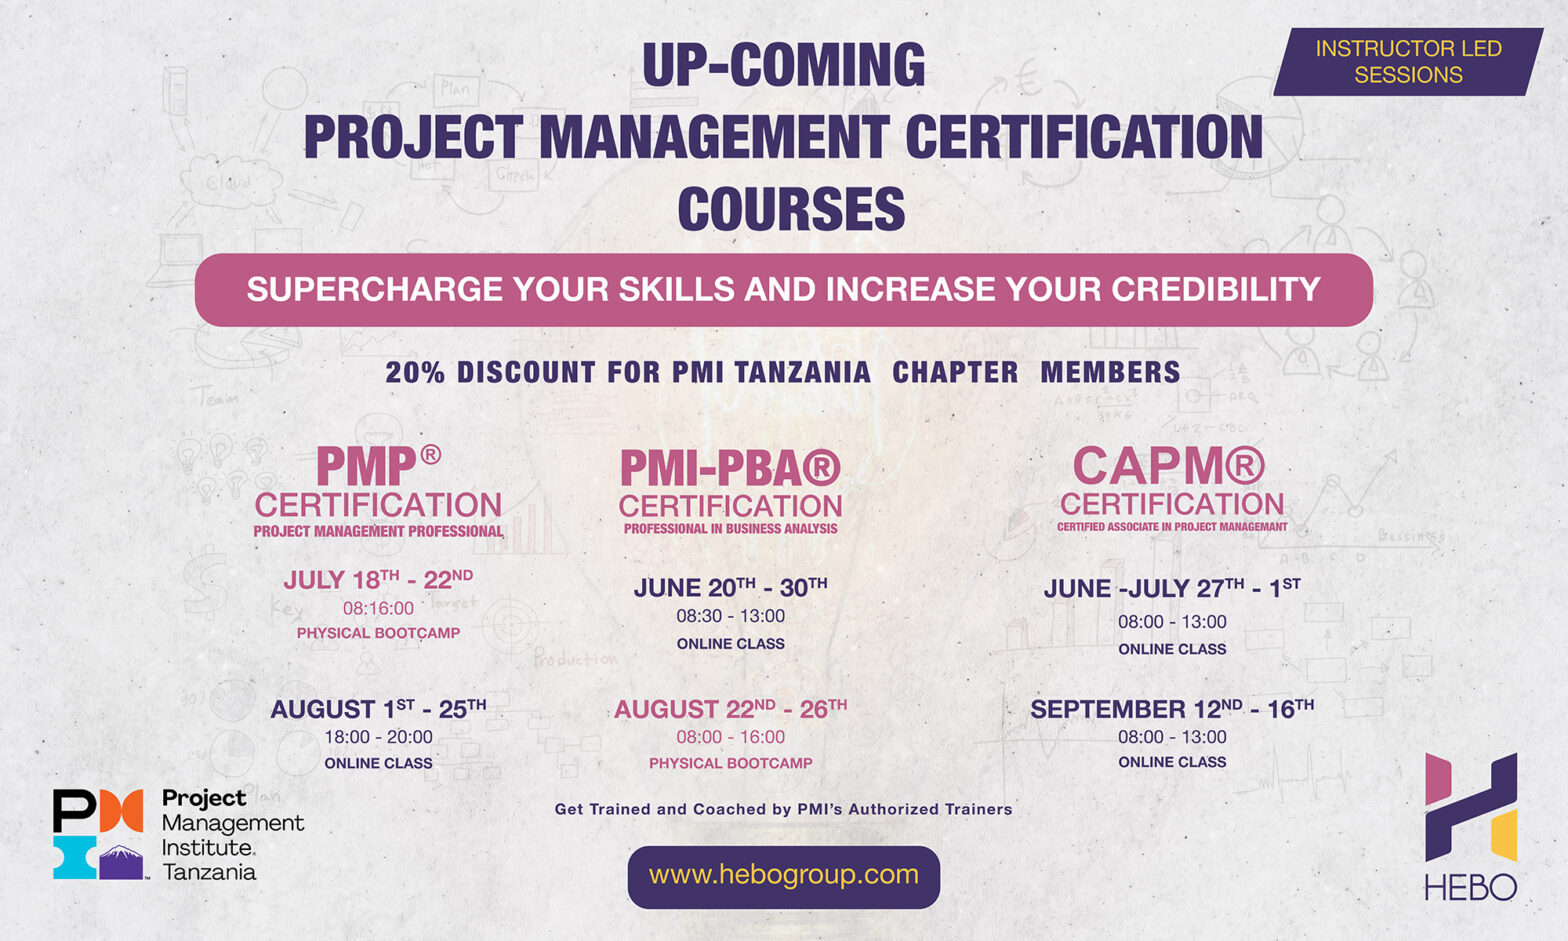 Upcoming Project Management Certification Courses by HEBO